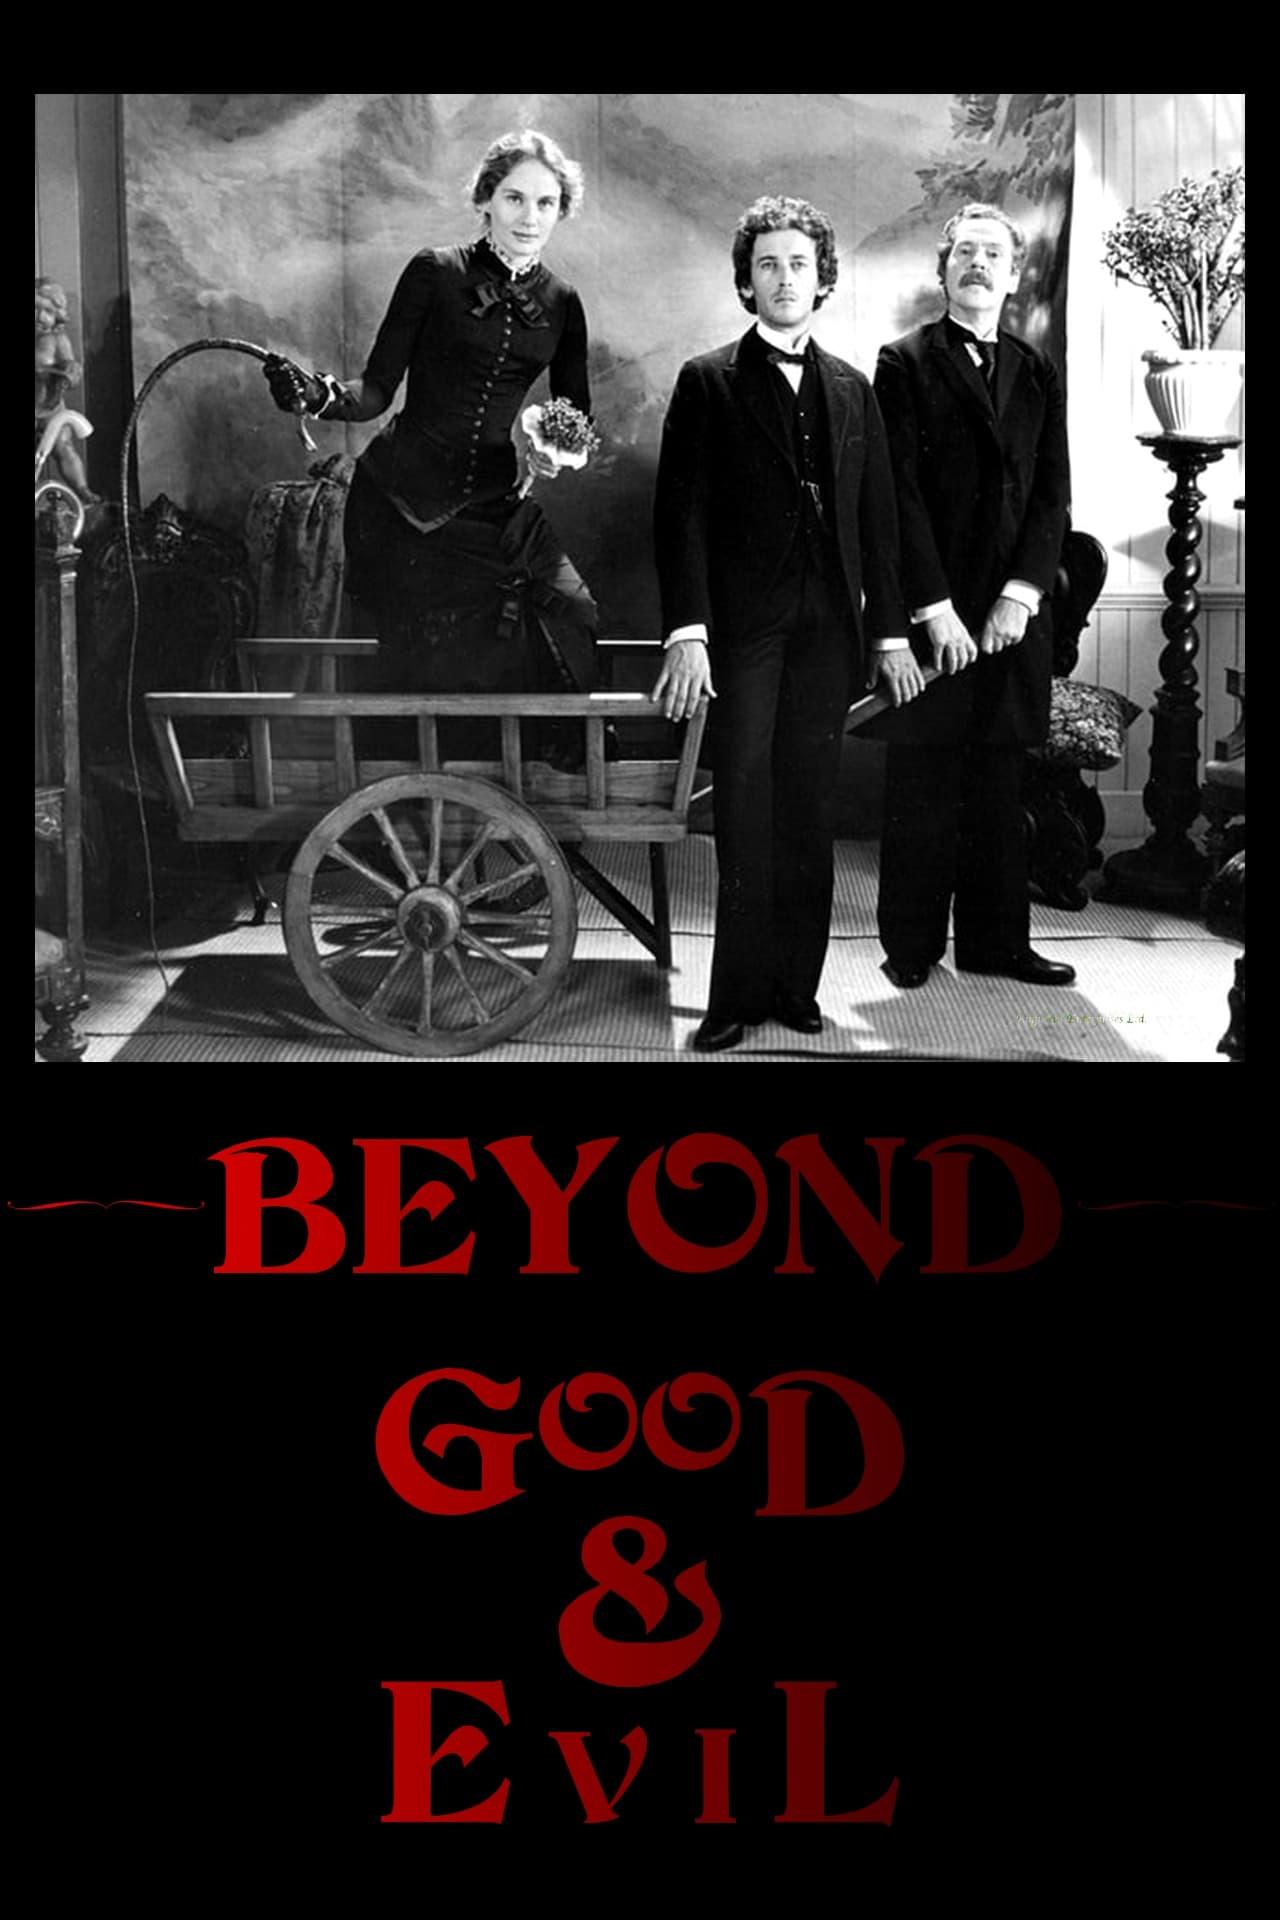 Beyond Good and Evil poster